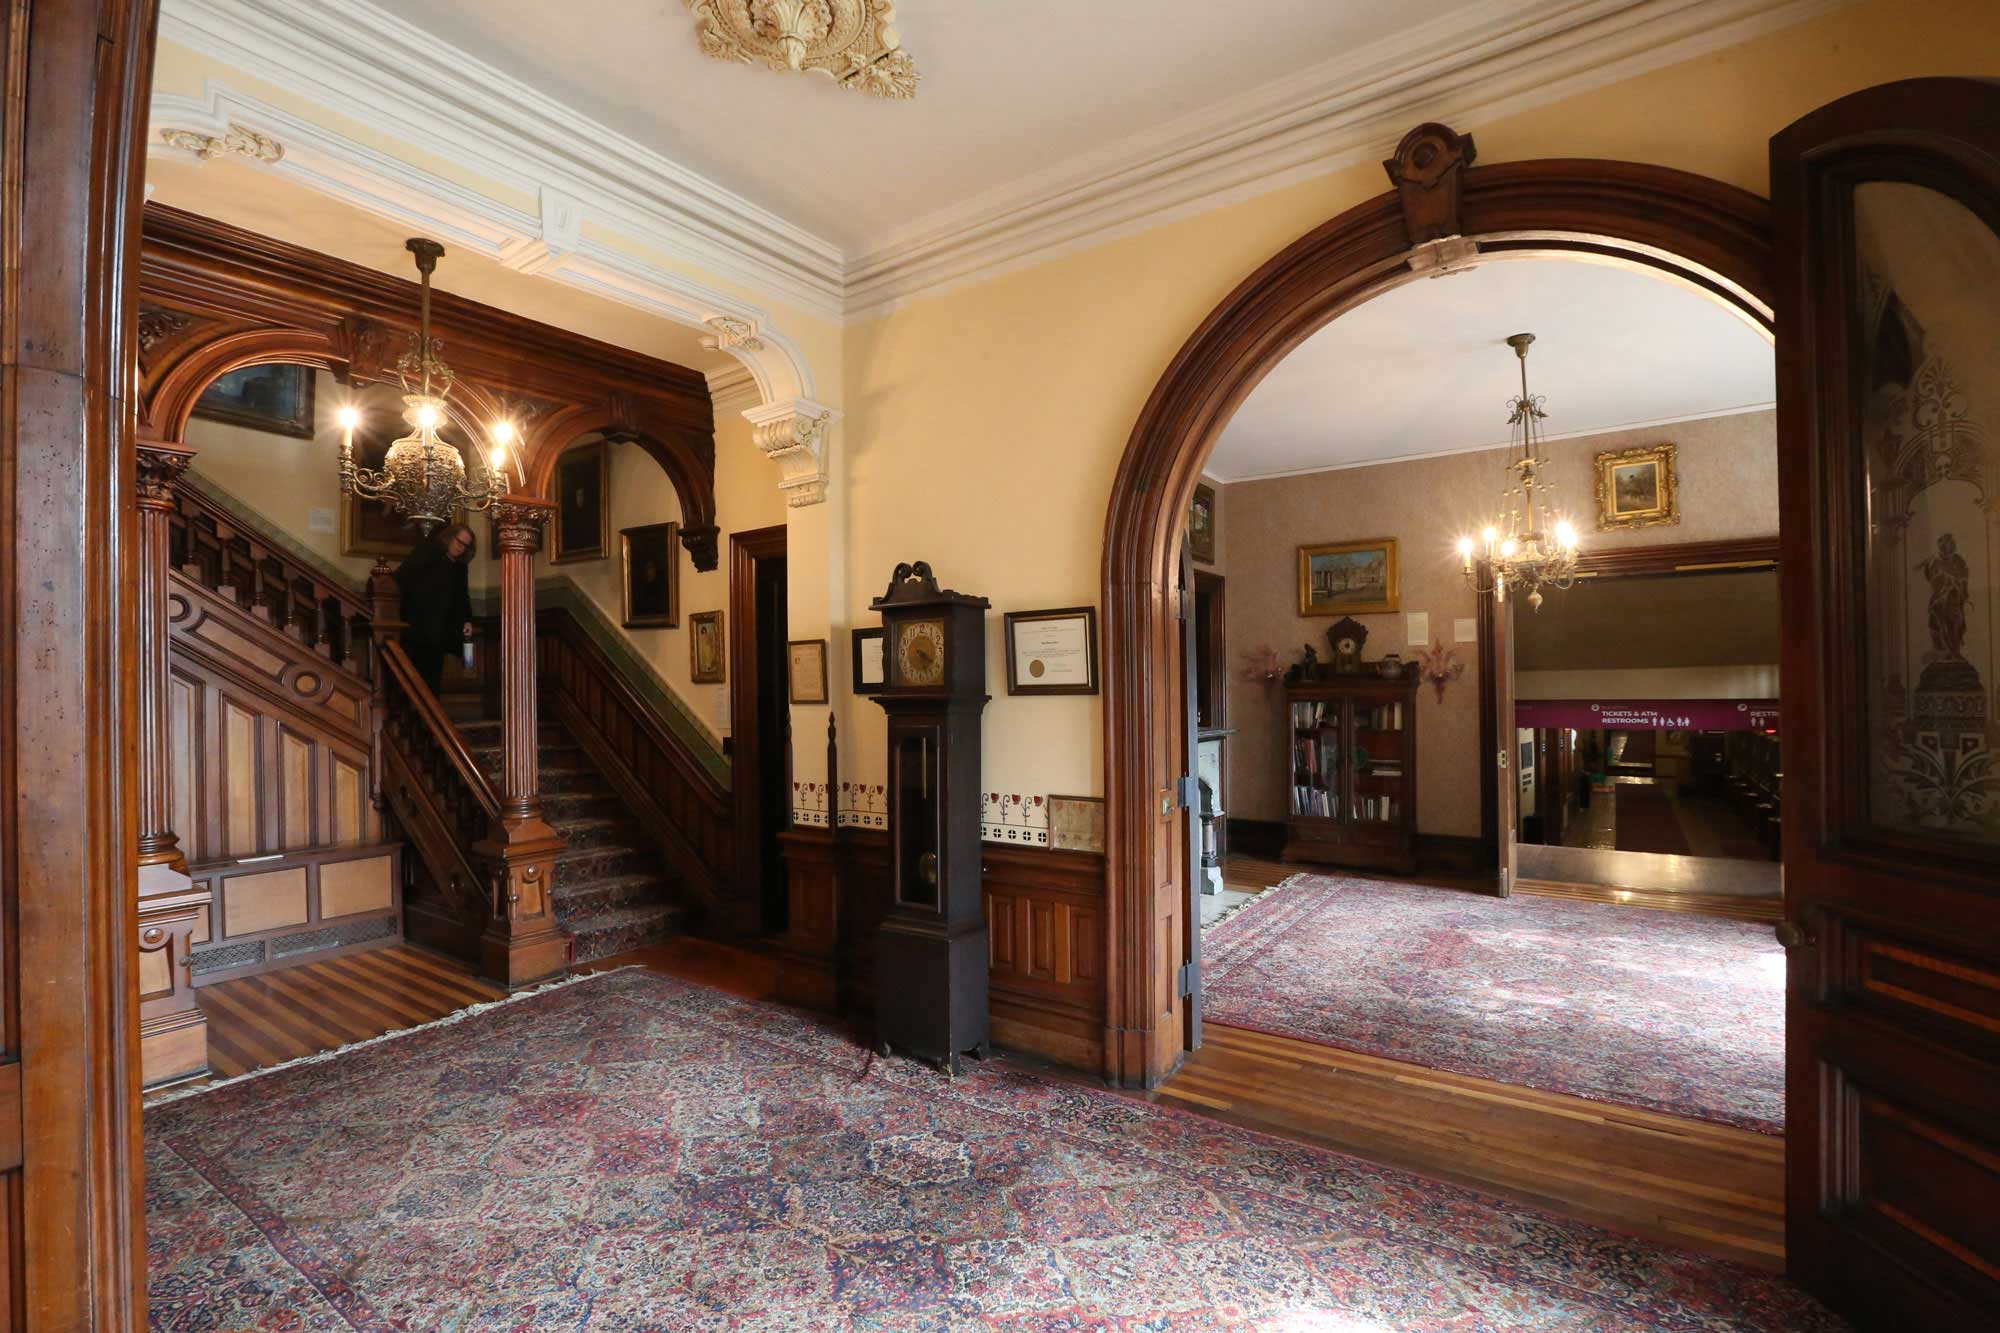 An interior view of the mansion with a large arched double doorway, a grandfather clock, and an ornately carved set of wood columns that frame a staircase.